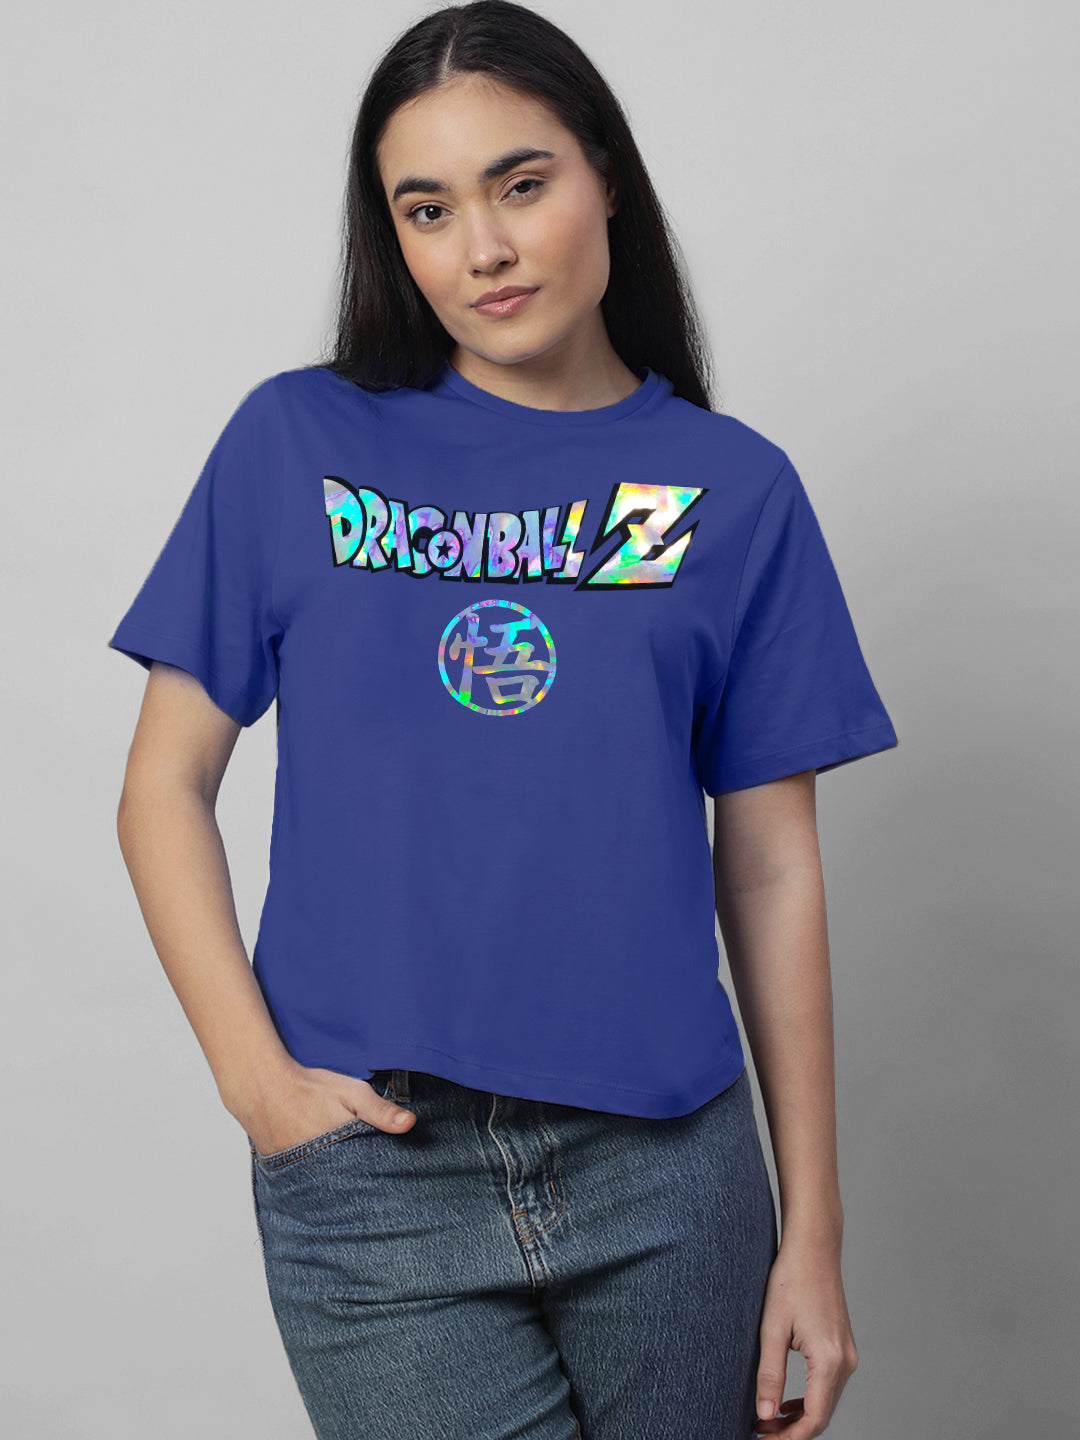 Free Authority Dragon Ball Z Printed Relaxed Fit Tshirt For Women